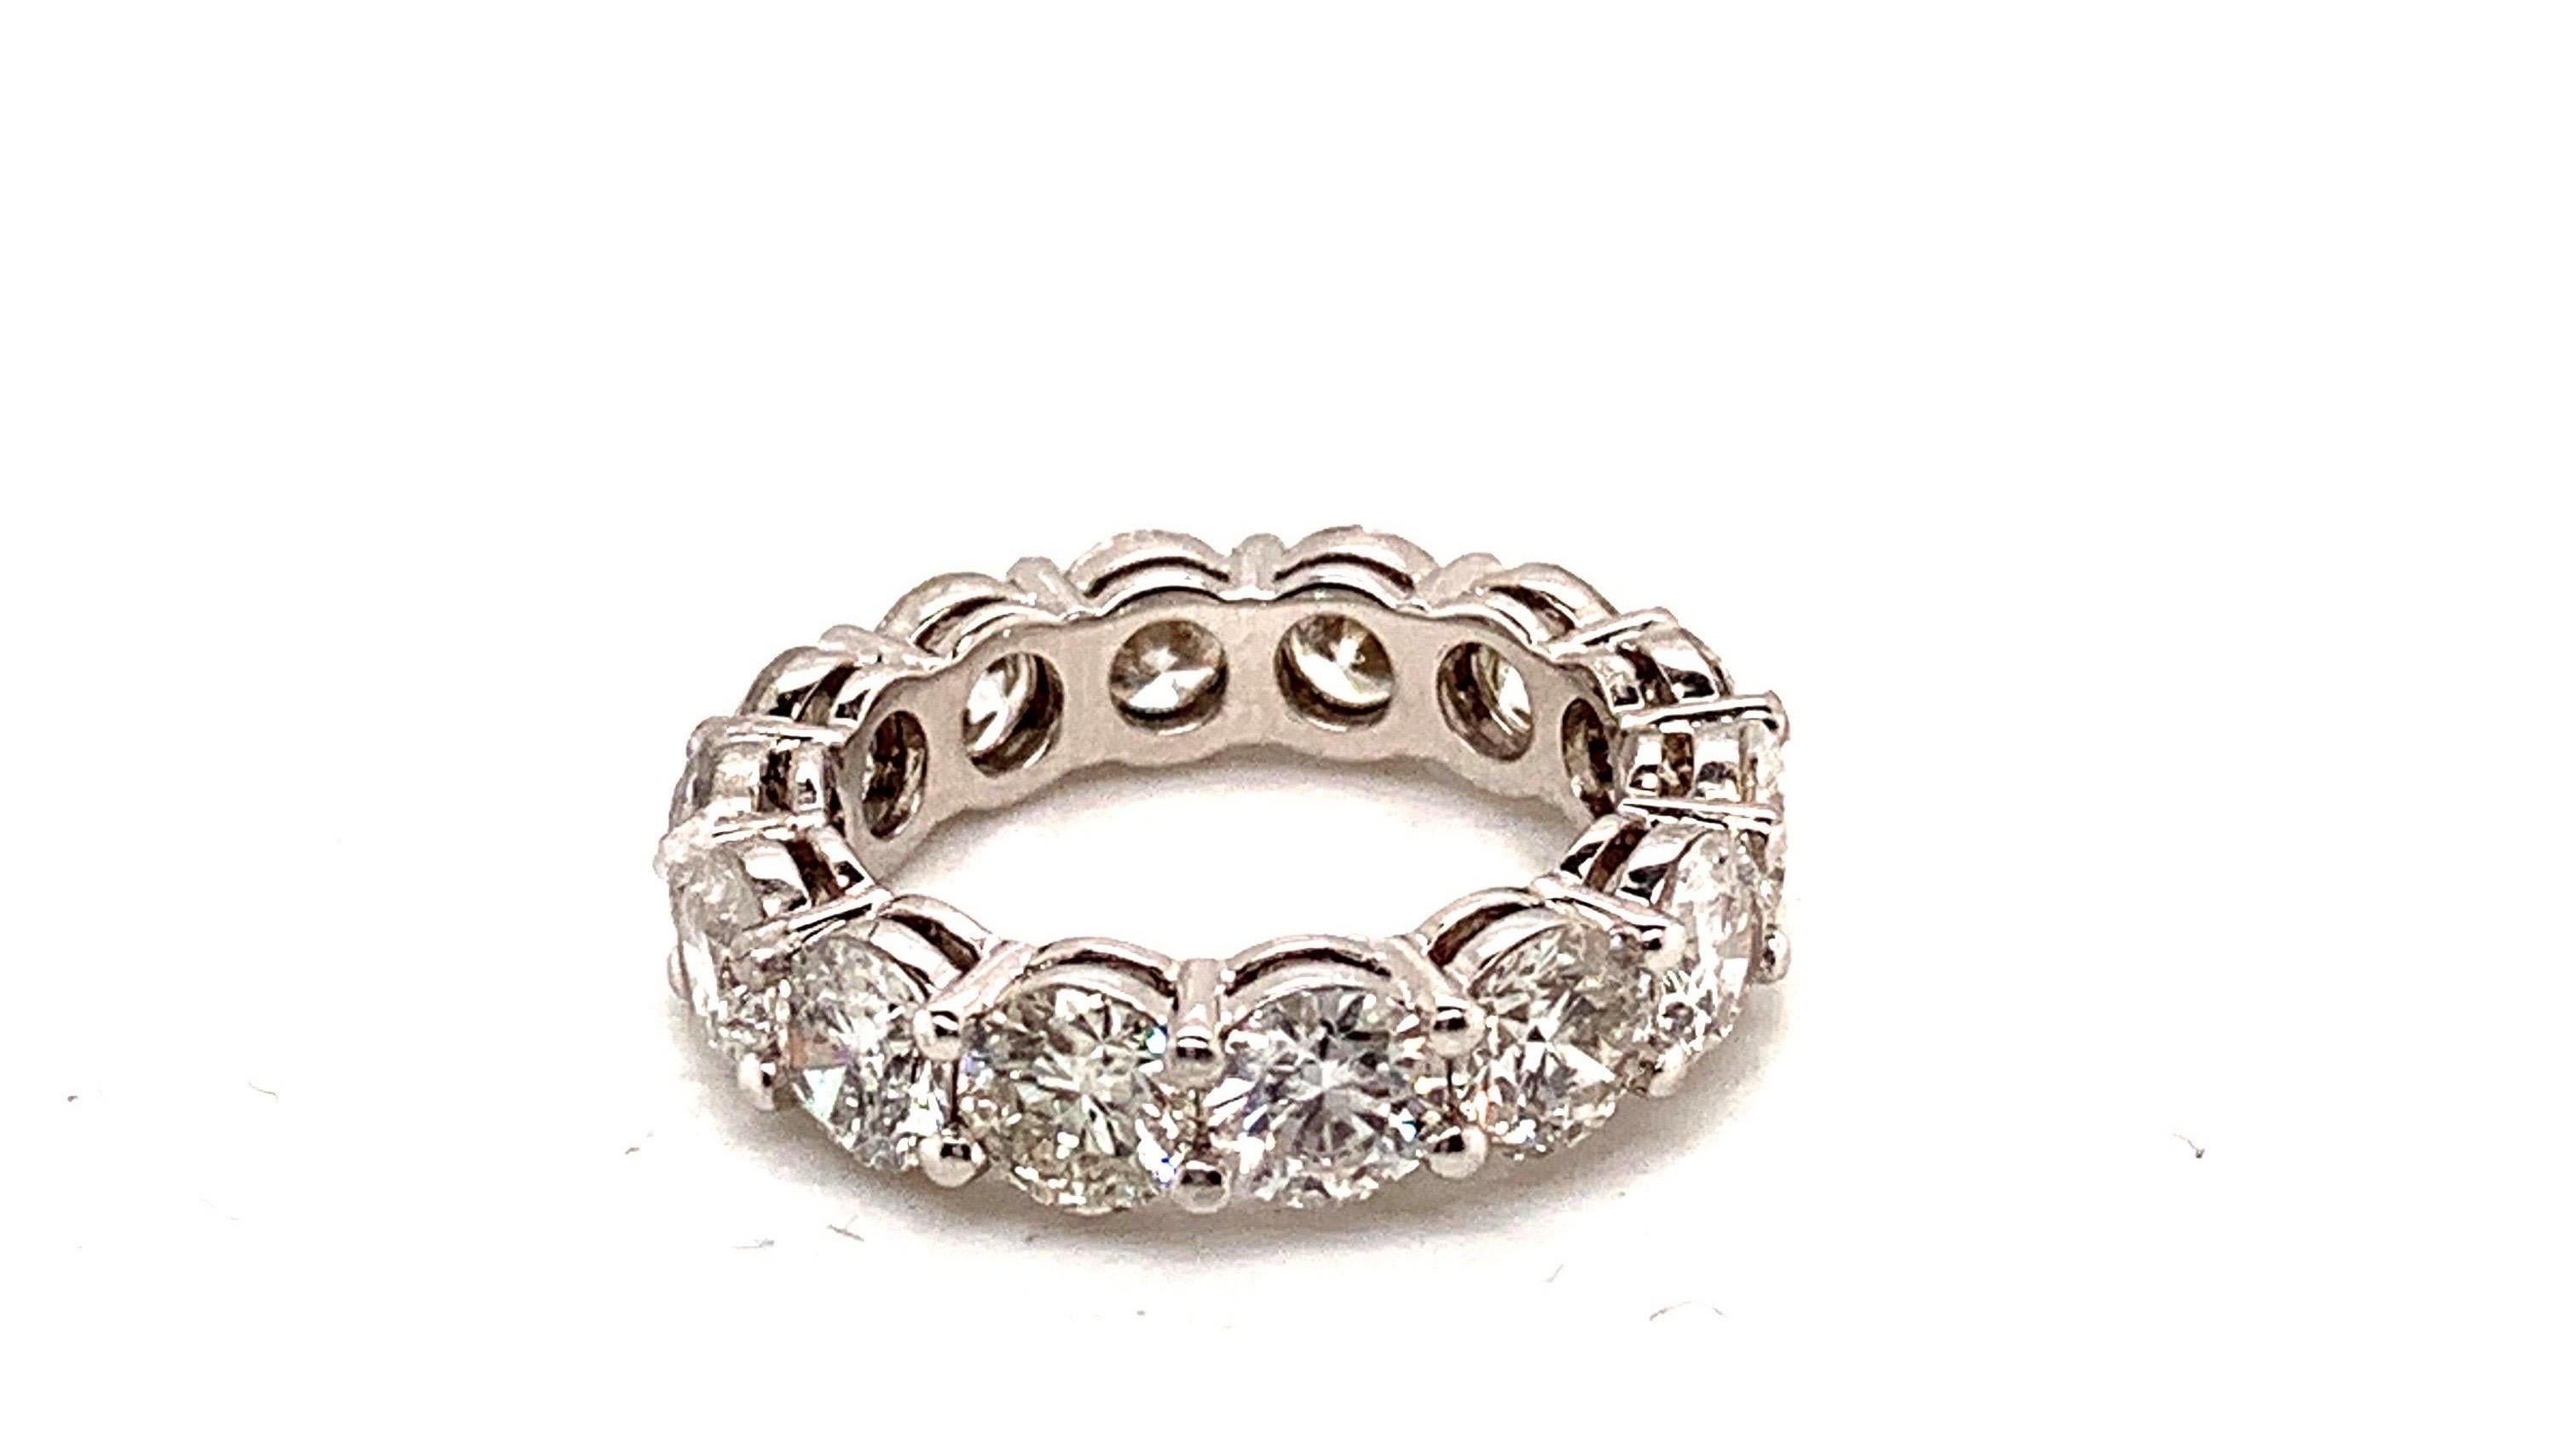 Exquisite eternity band. hand crafted in 18k GOLD each one of the 14 diamonds weigh approx. .50 carats G-H color SI clarity. The beautiful Diamonds are mounted in a share prong setting, thus showing minimal amount of metal resulting in the maximum